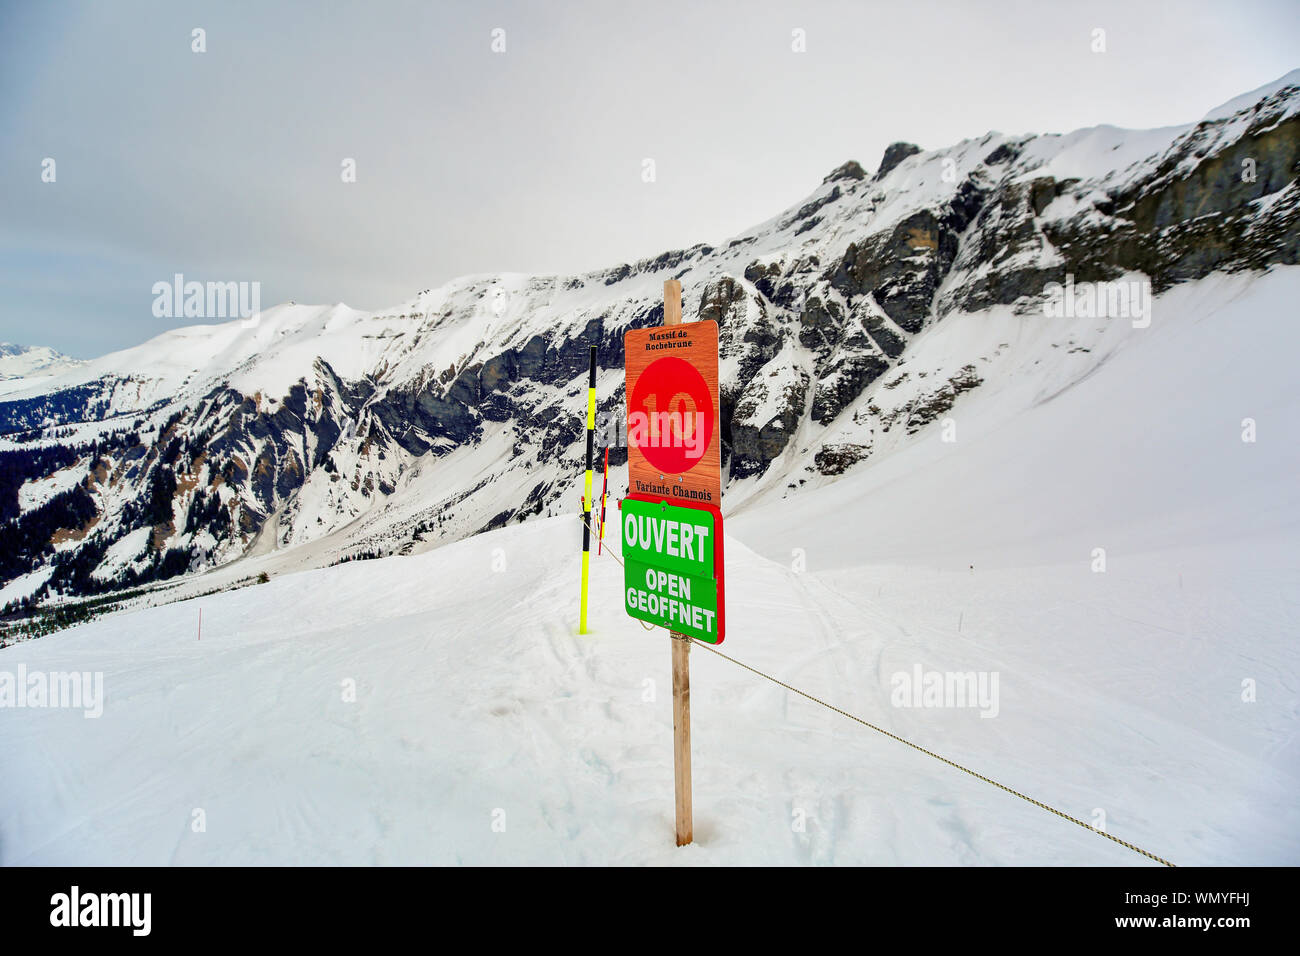 Open sign at start of a Ski Piste in Megeve / Chamonix of French Alps. Text written on the sign means 'Open' in French, German and English languages. Stock Photo